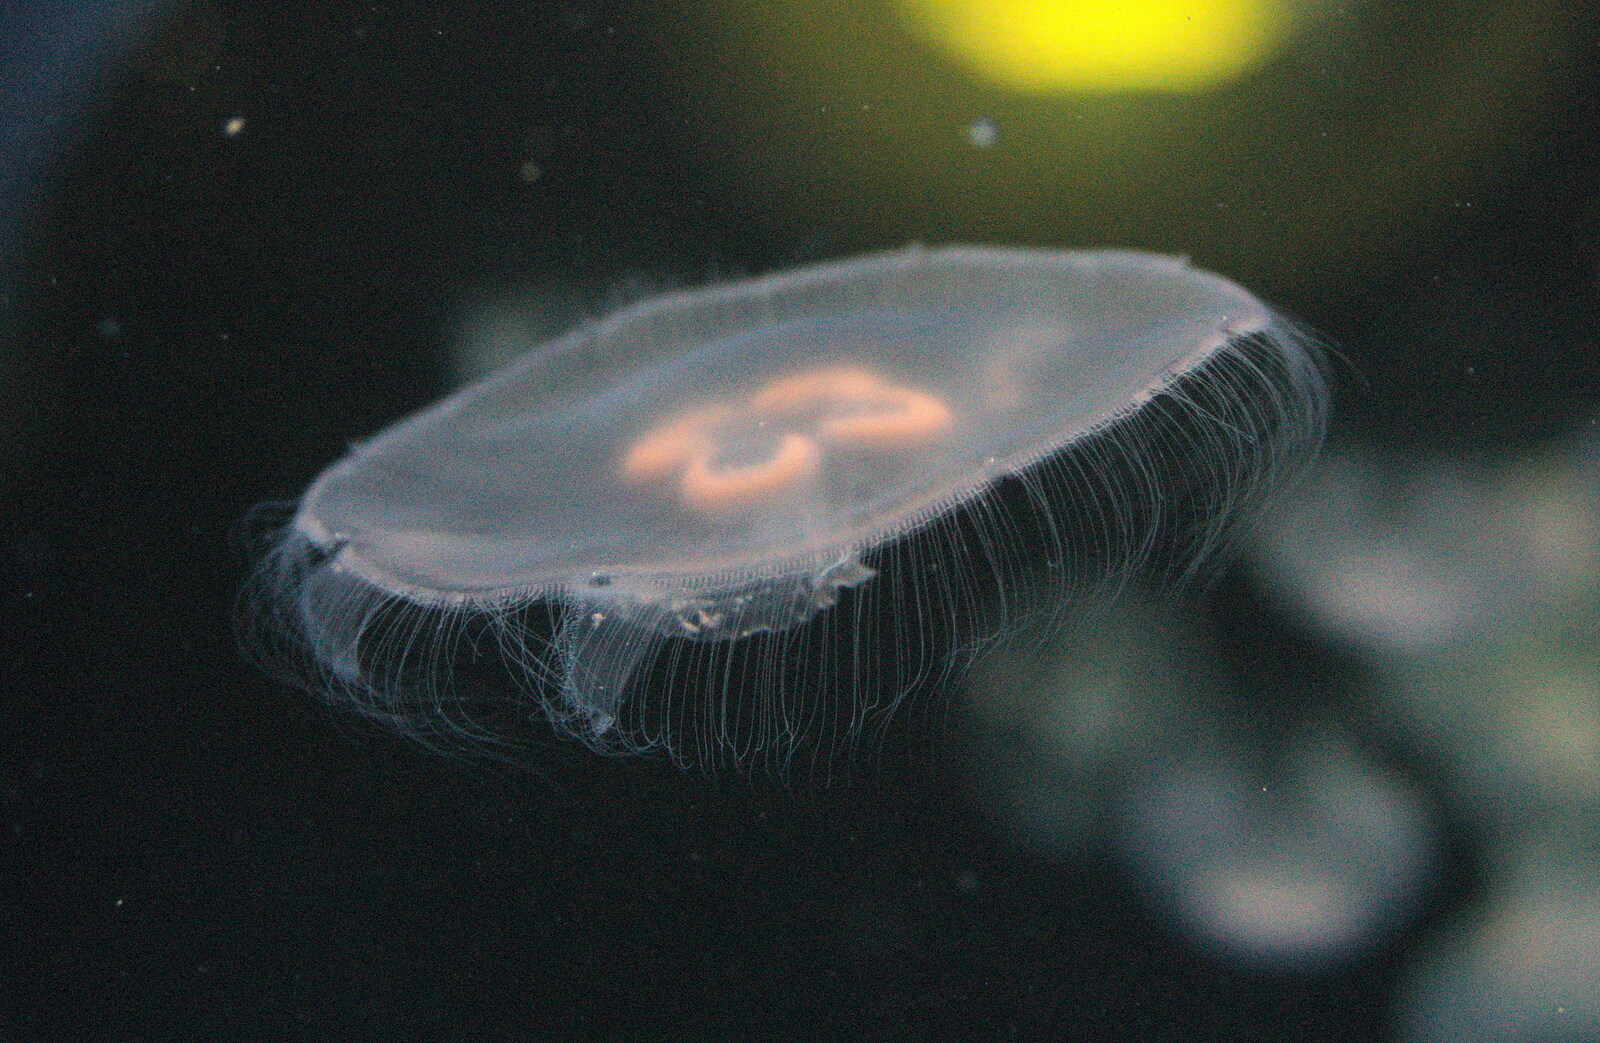 Delicate tendrils on a jellyfish from A Visit to the Aquarium, The Barbican and Dartmoor, Plymouth, Devon - 10th June 2012